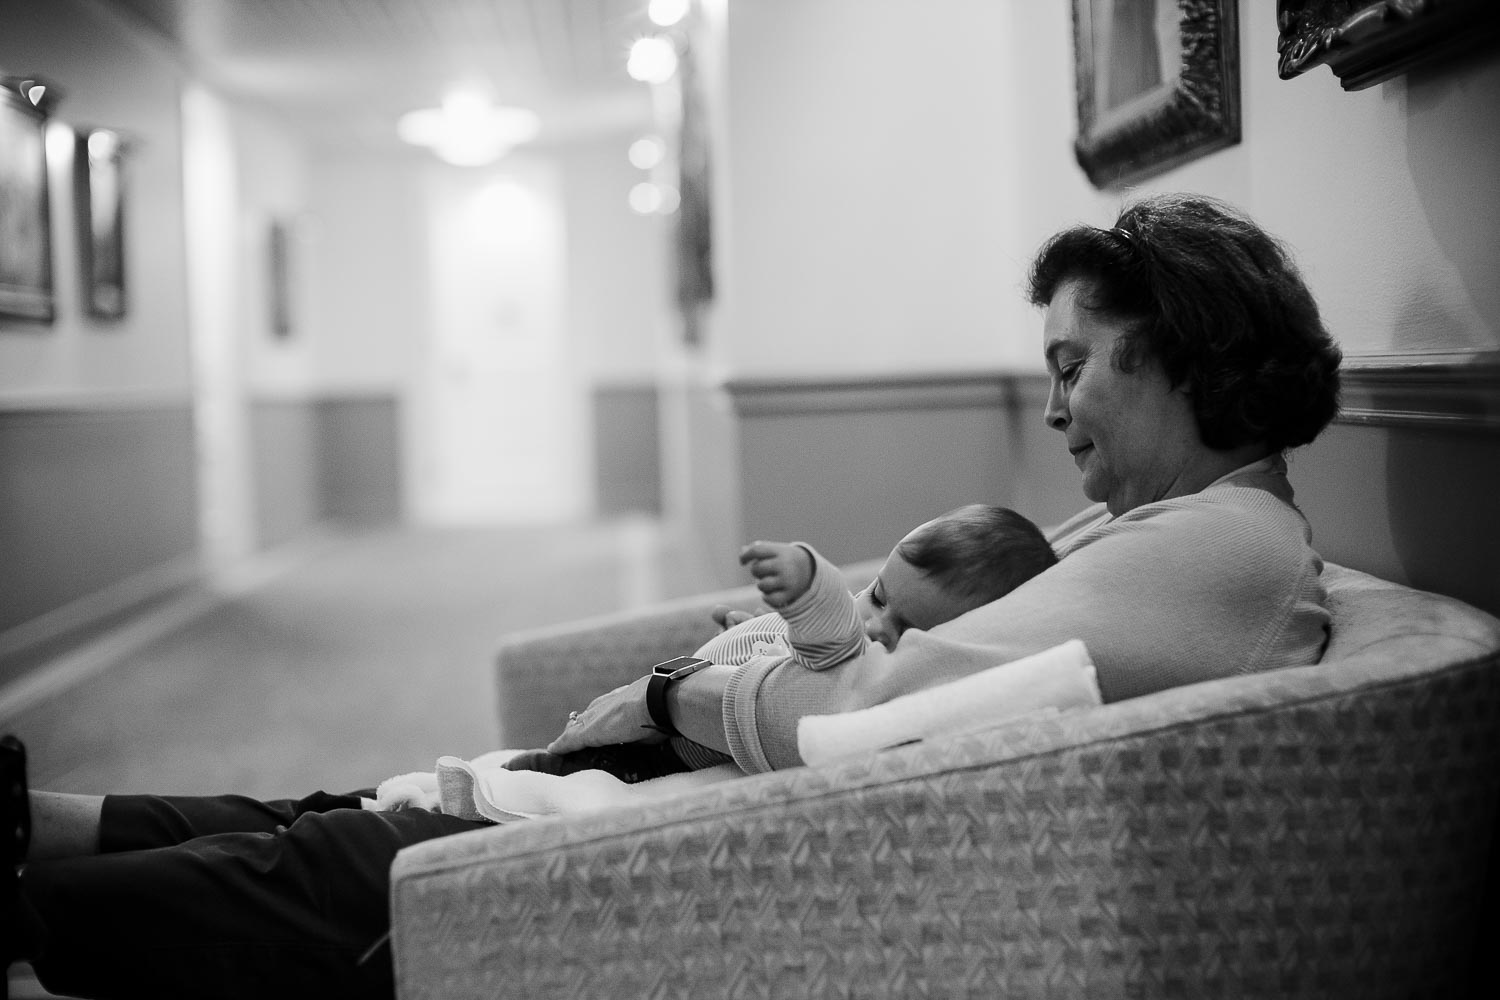 Grandmother and granddaughter in a quiet moment away from the crowds at Driskill Hotel in Austin Texas